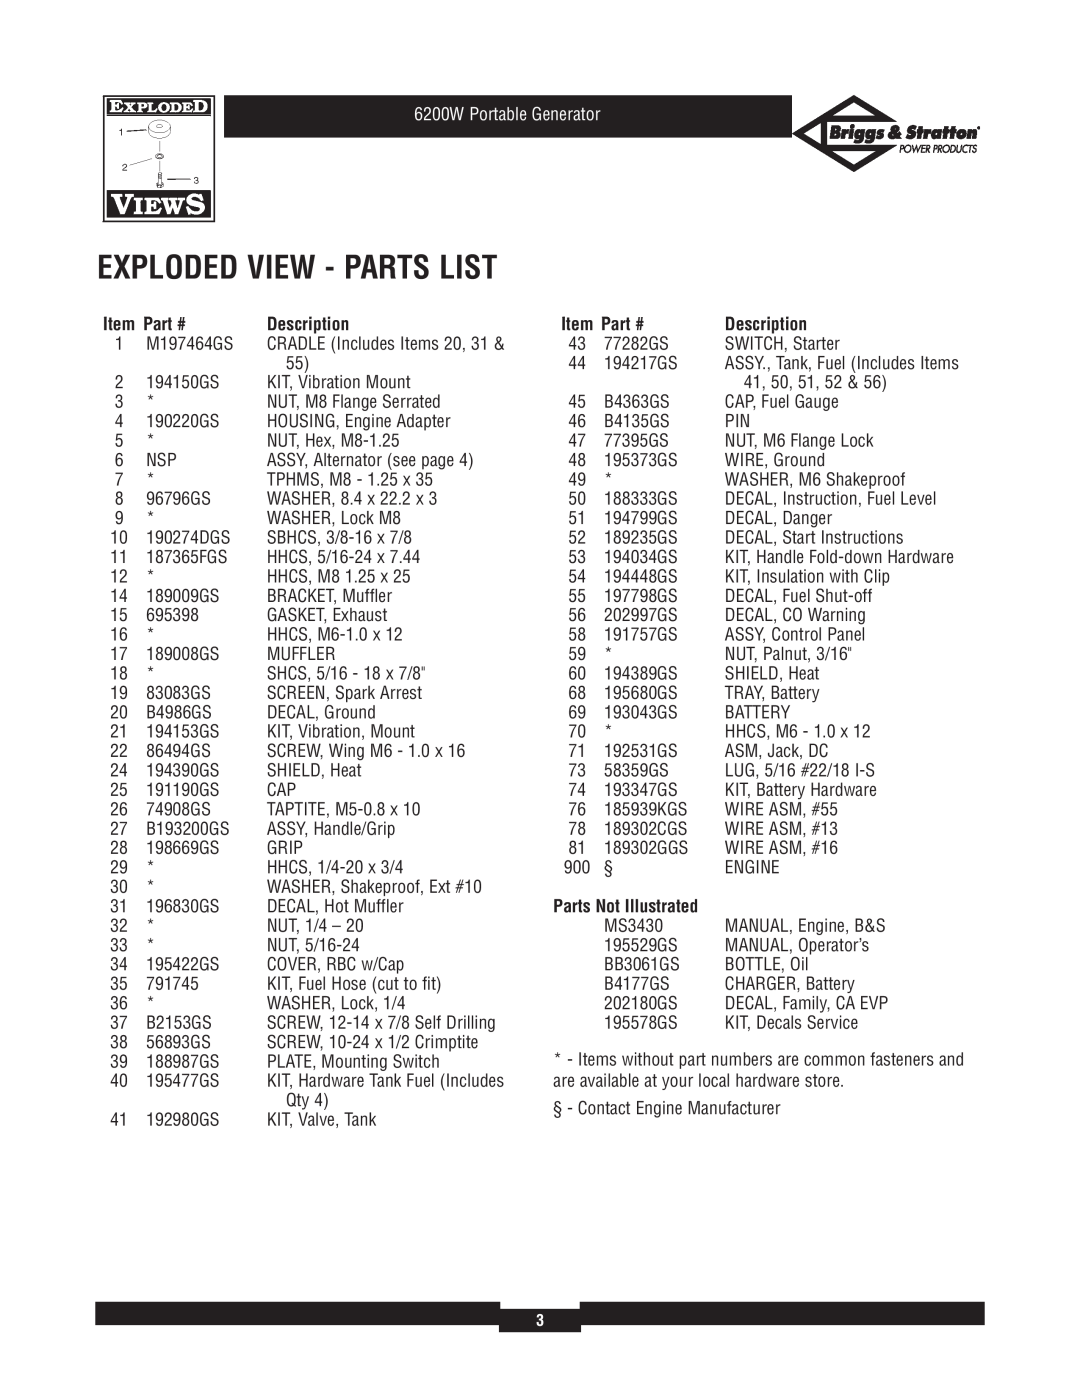 Briggs & Stratton 030211-1 manual Exploded View - Parts List, Description, Parts Not Illustrated, 6200W Portable Generator 